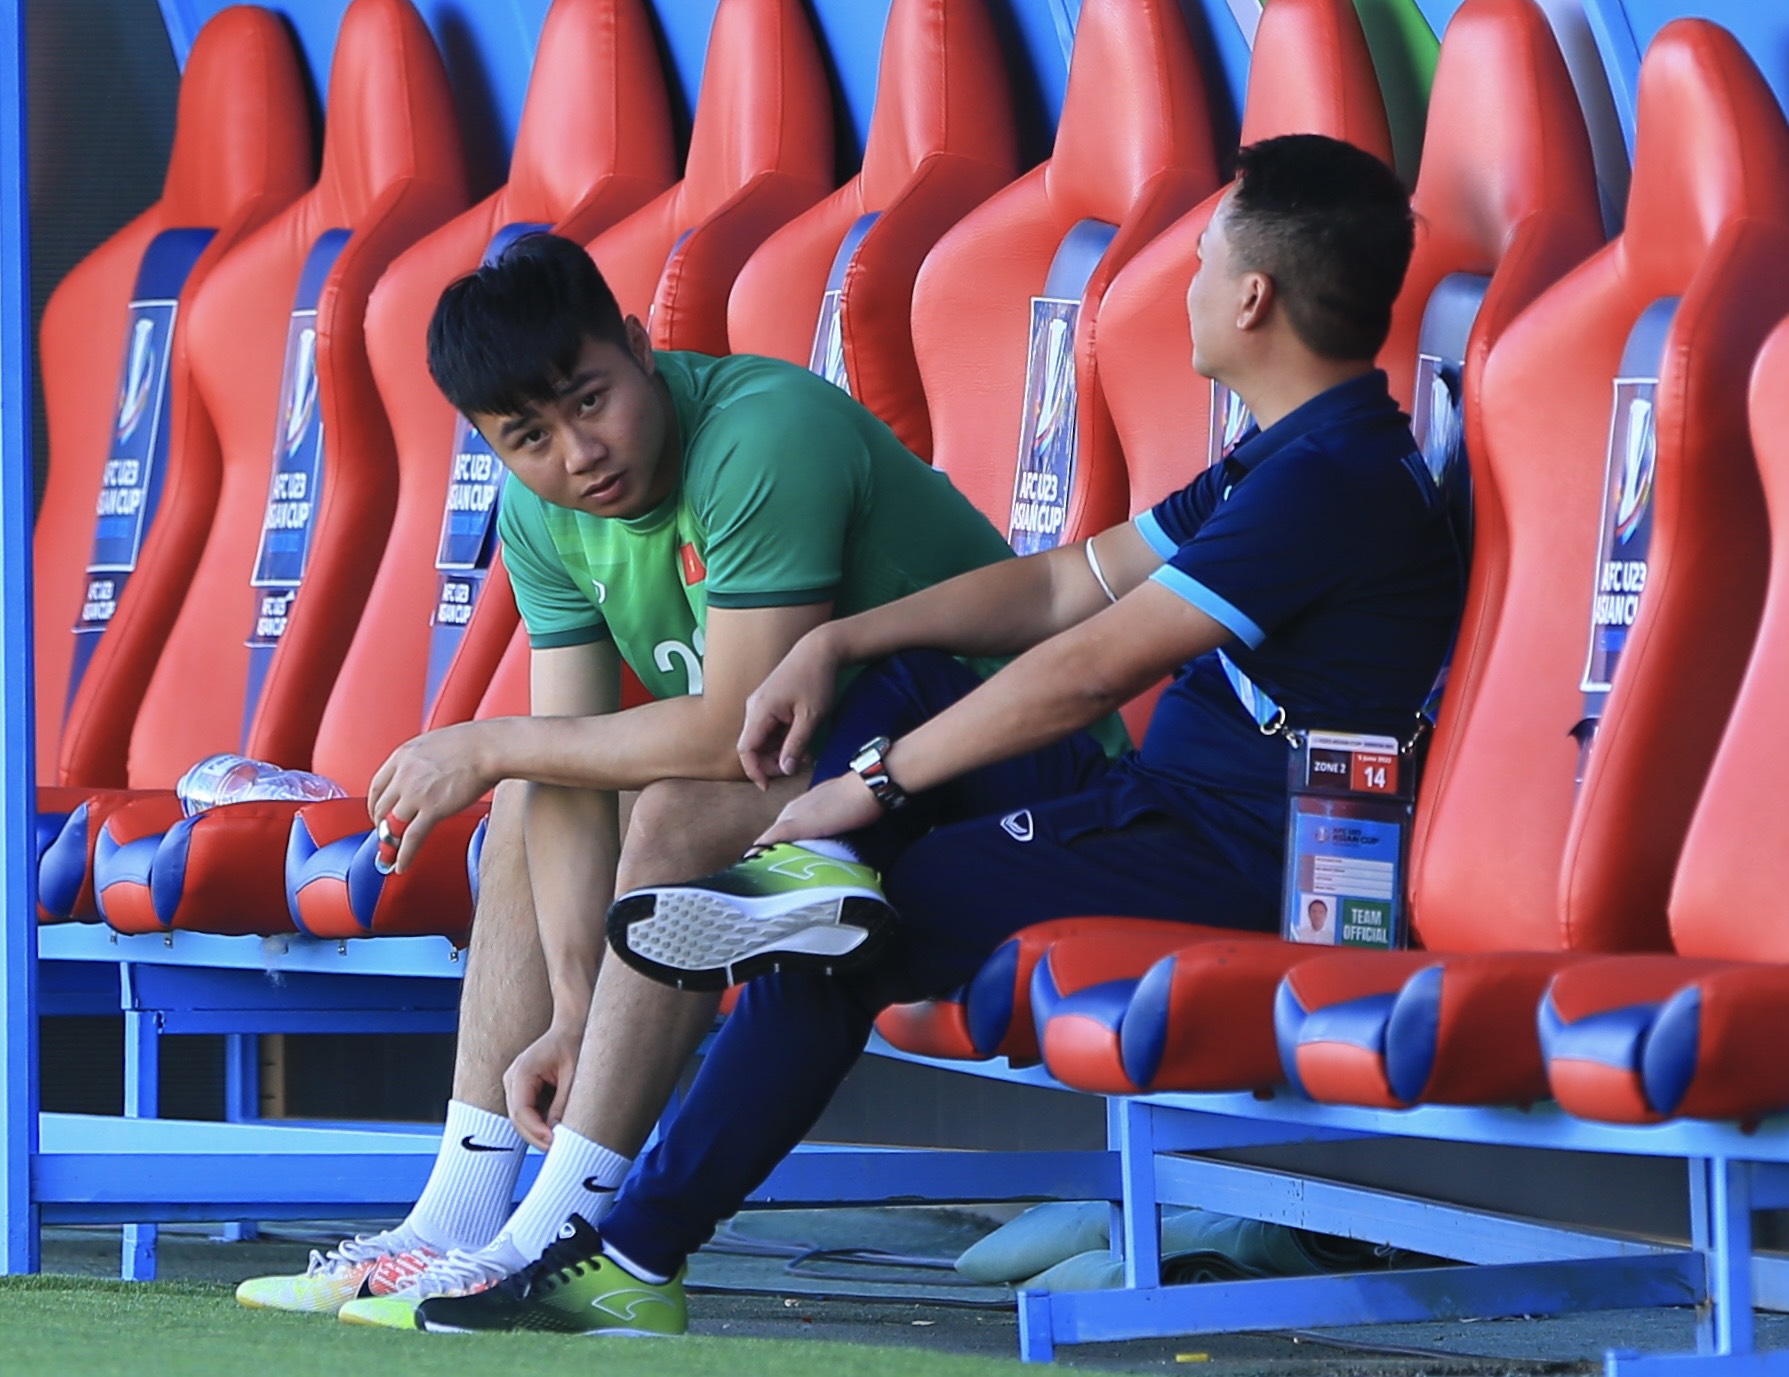 Van Toan sat contemplatively looking at his teammates, Dung Quang Nho recharged before the time U23 Vietnam played - Photo 2.